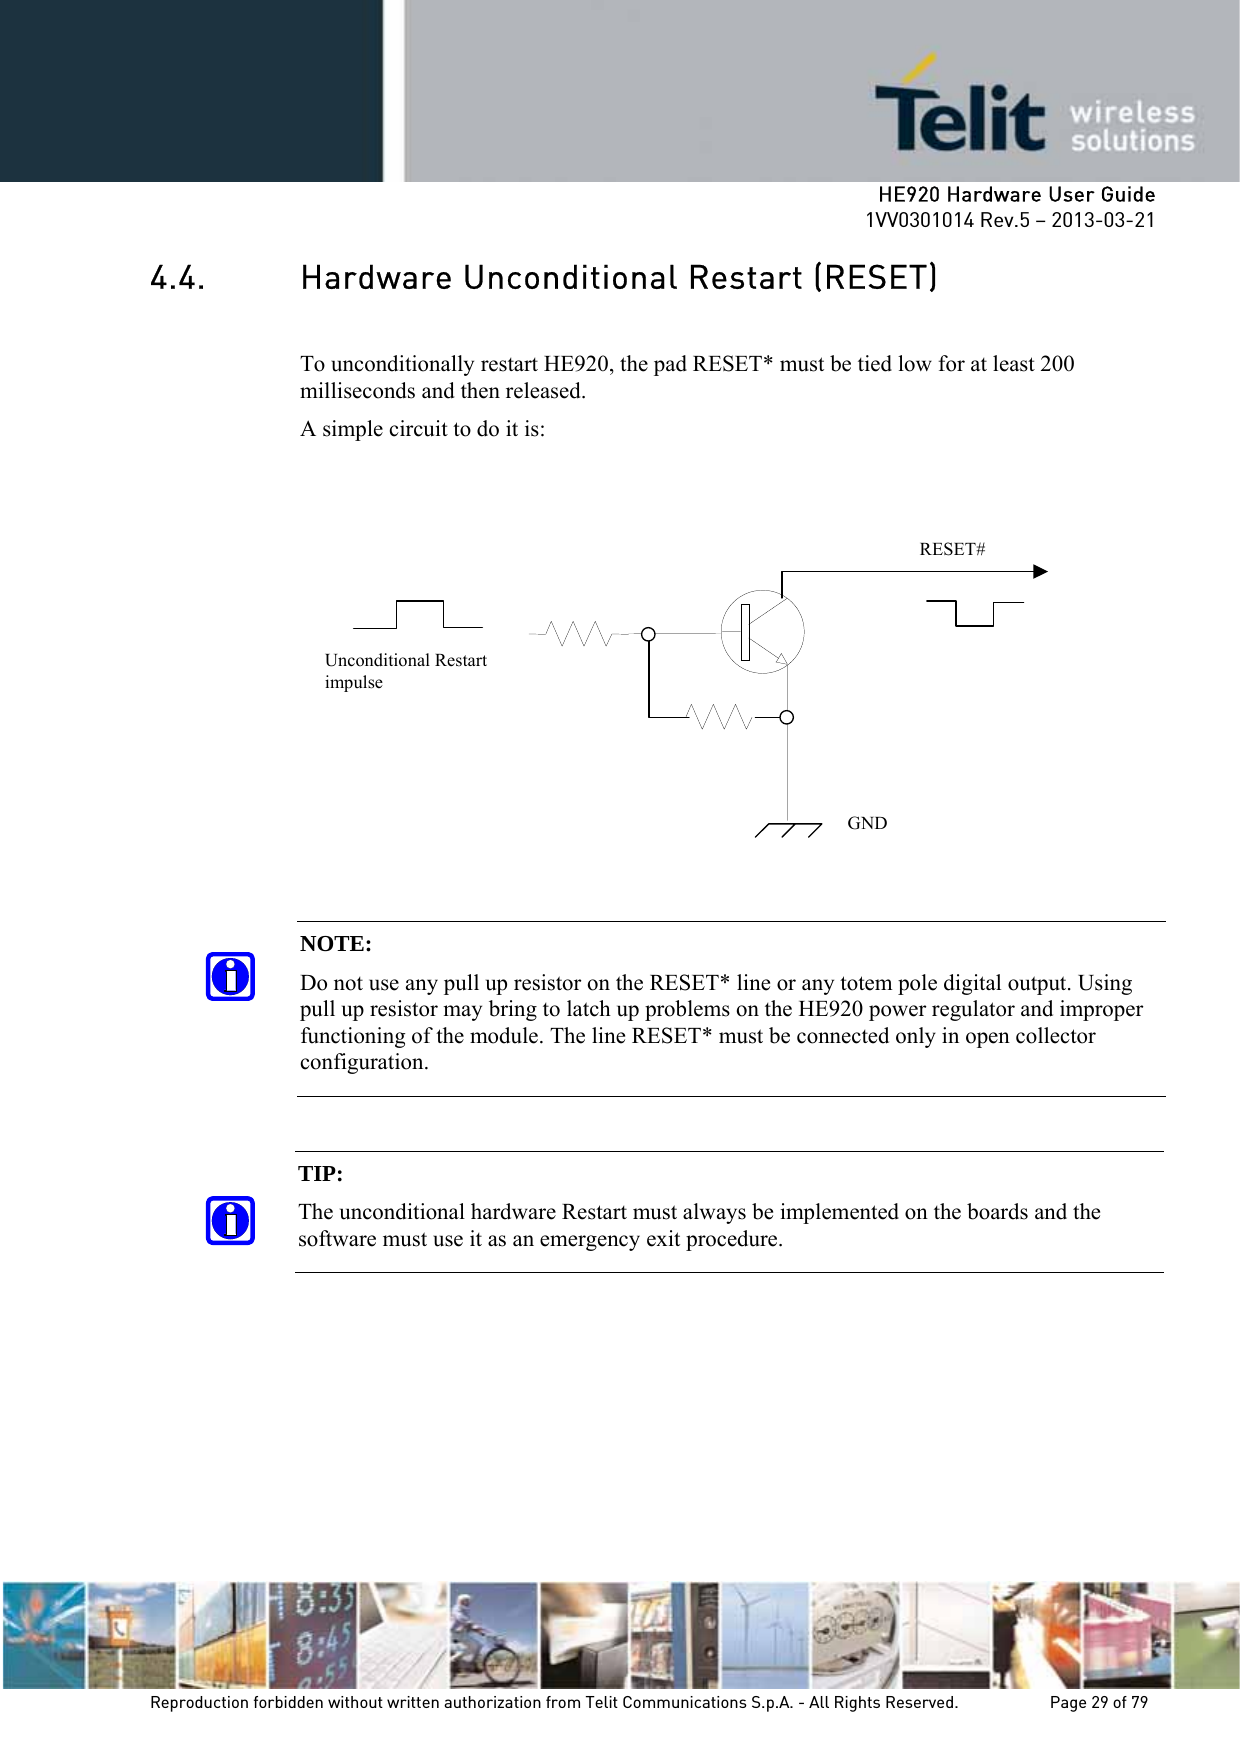     HE920 Hardware User Guide 1VV0301014 Rev.5 – 2013-03-21 Reproduction forbidden without written authorization from Telit Communications S.p.A. - All Rights Reserved.    Page 29 of 79  4.4. Hardware Unconditional Restart (RESET)  To unconditionally restart HE920, the pad RESET* must be tied low for at least 200 milliseconds and then released. A simple circuit to do it is:                    NOTE:  Do not use any pull up resistor on the RESET* line or any totem pole digital output. Using pull up resistor may bring to latch up problems on the HE920 power regulator and improper functioning of the module. The line RESET* must be connected only in open collector configuration. TIP:  The unconditional hardware Restart must always be implemented on the boards and the software must use it as an emergency exit procedure.    RESET# Unconditional Restart impulse   GND 